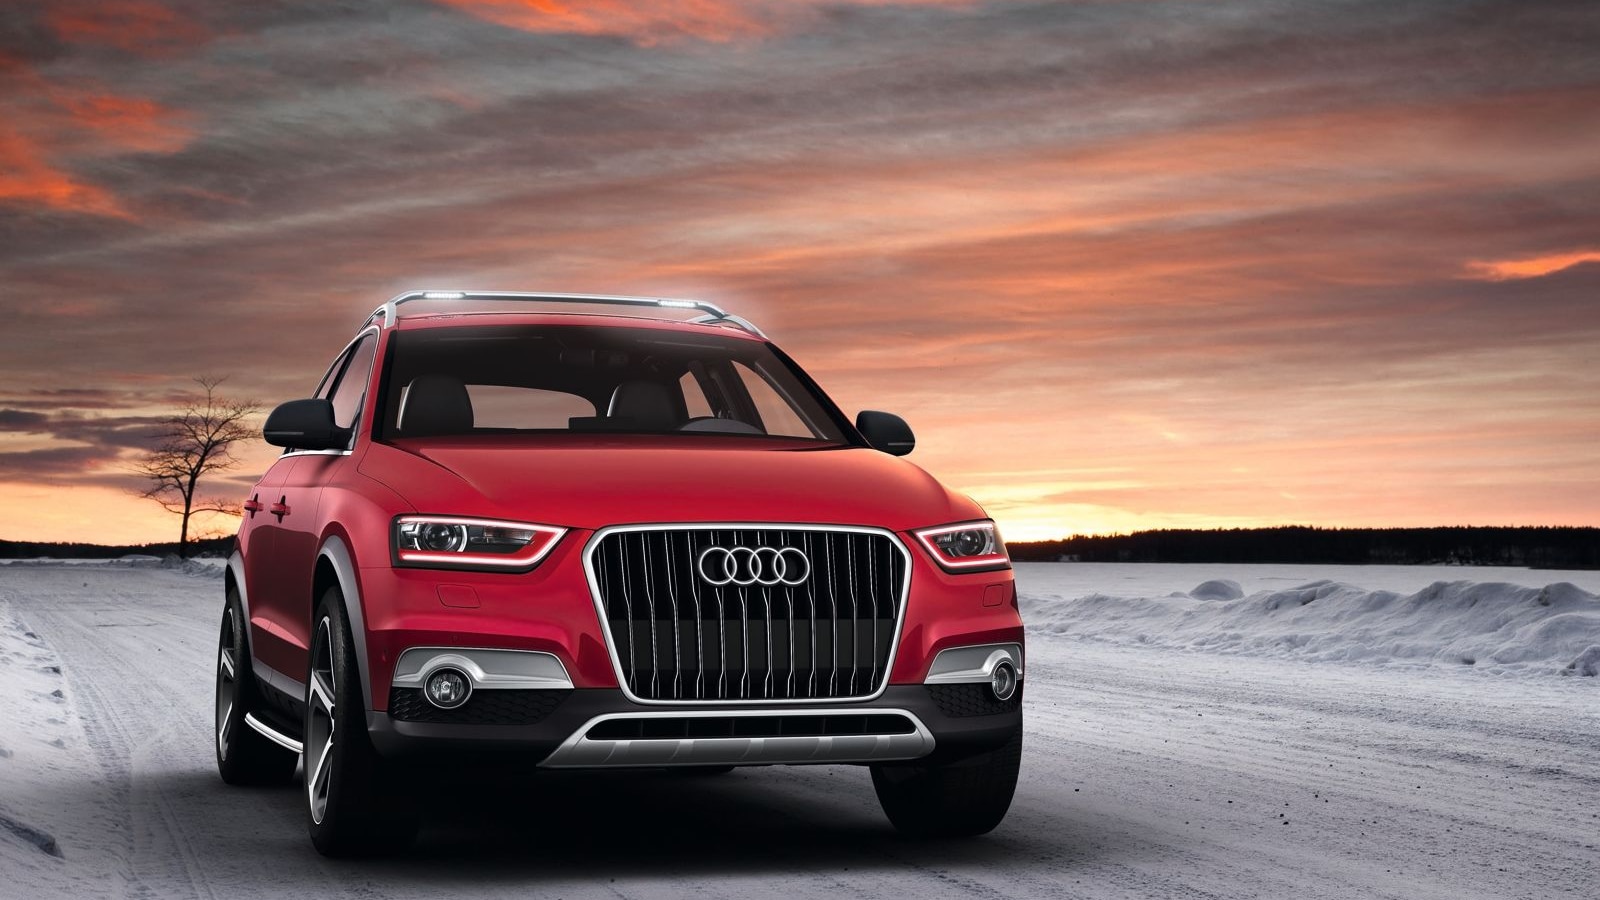 Audi To Roll Out 'New' Q3 Concept At Wörthersee